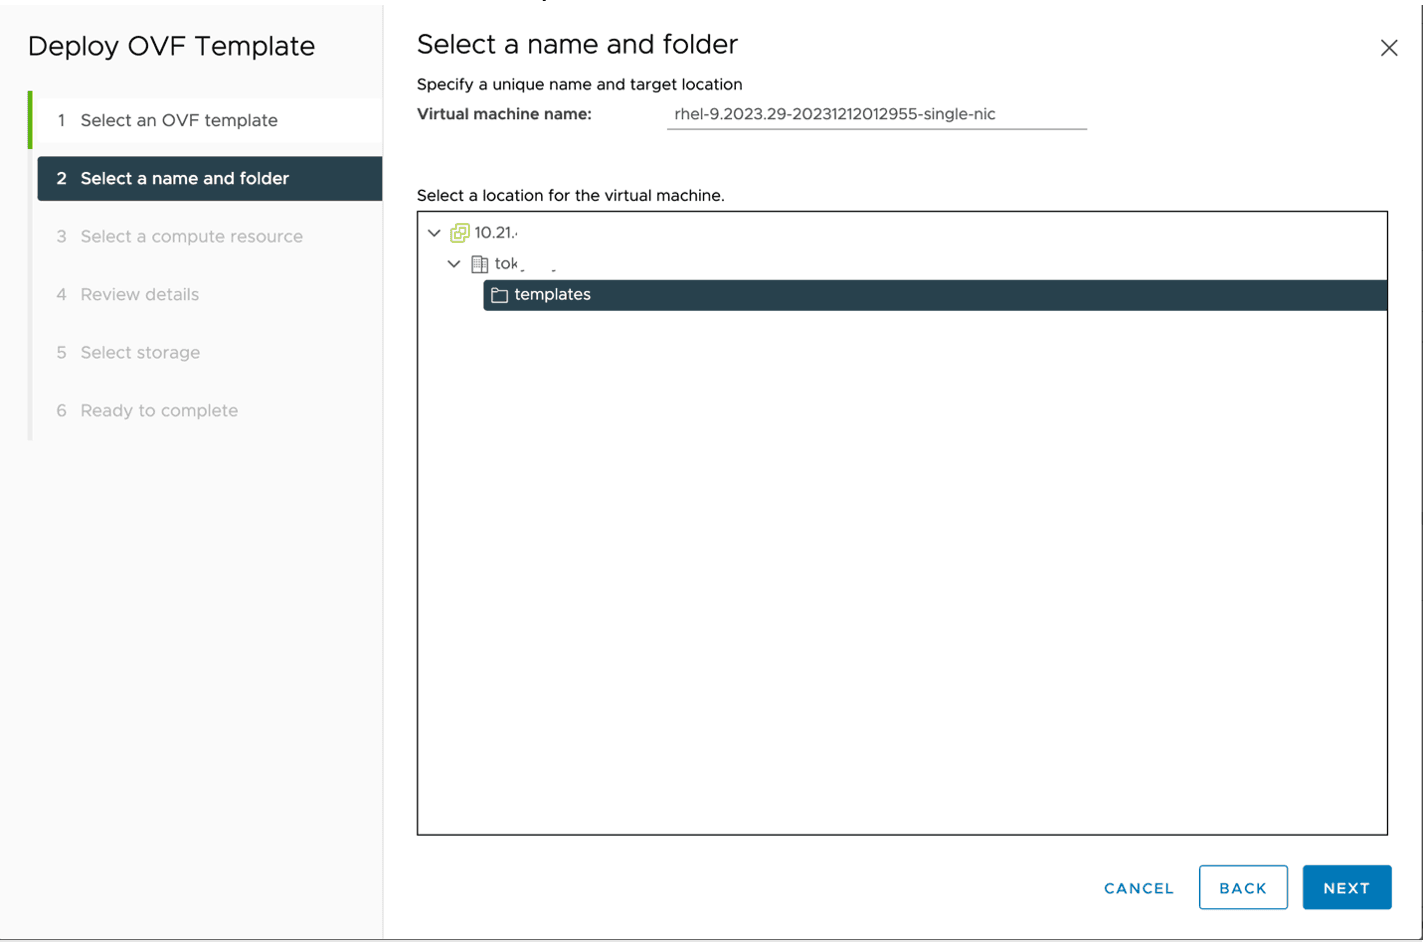 Figure: Select a name and folder page